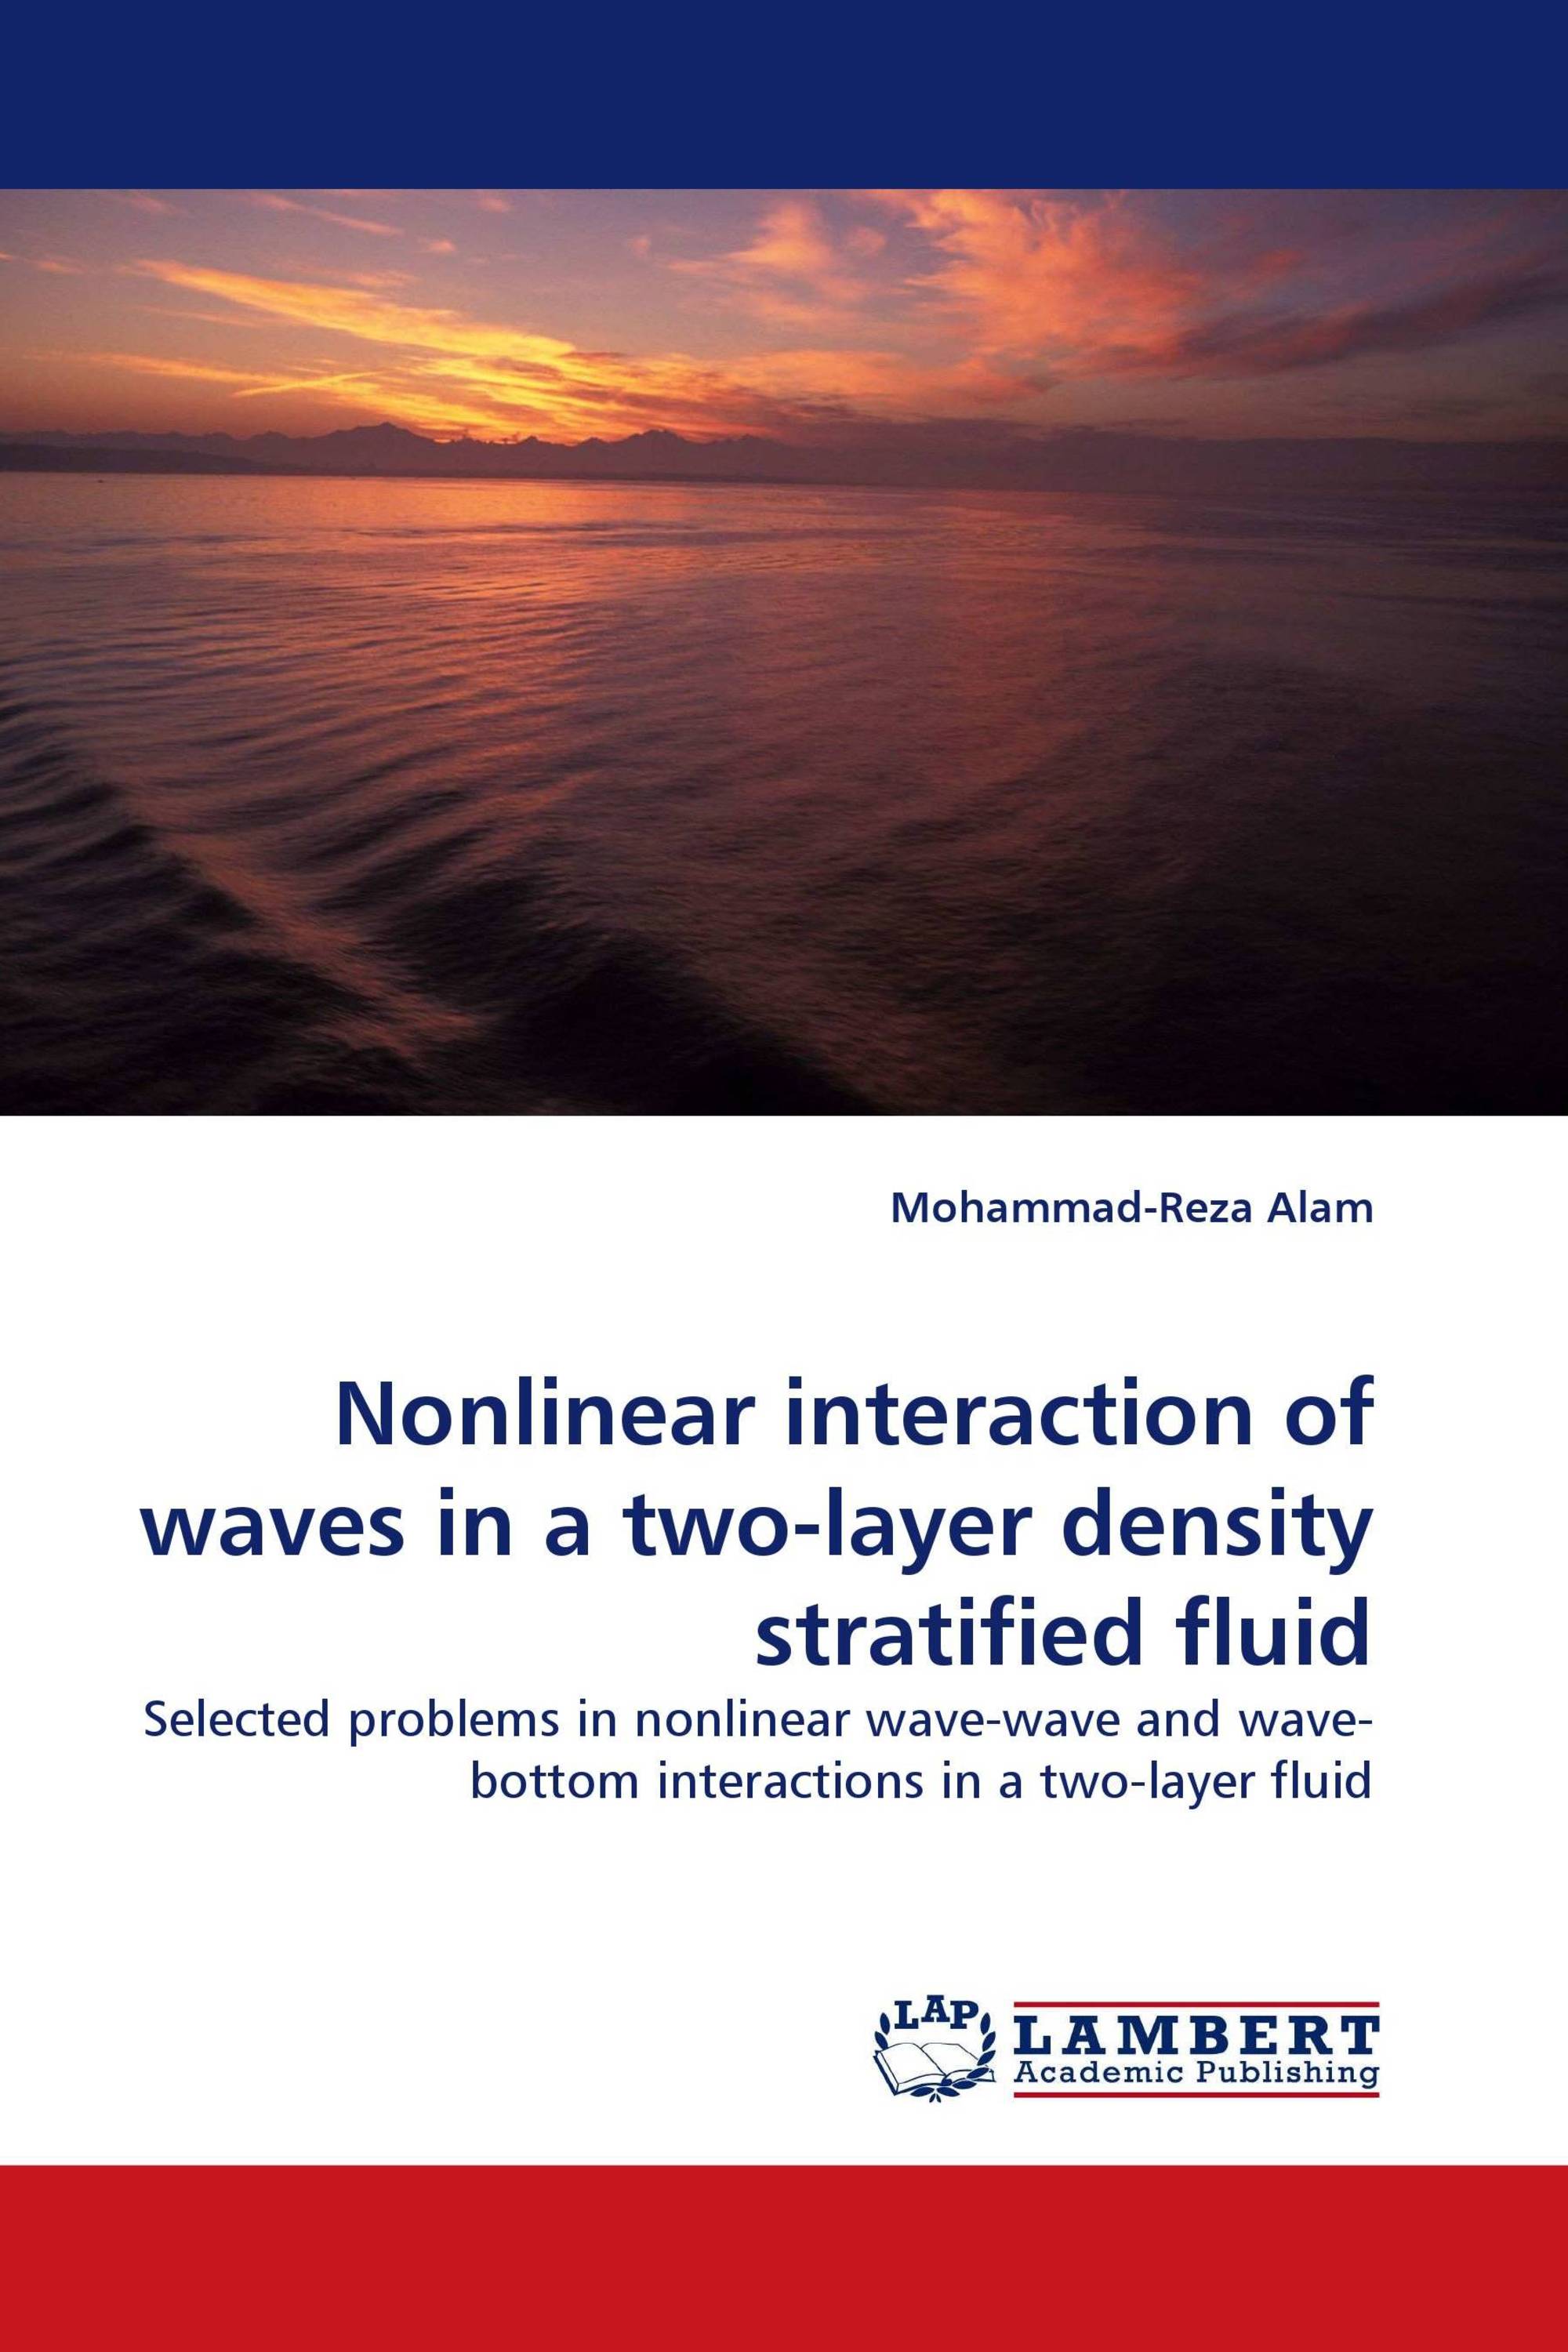 Nonlinear interaction of waves in a two-layer density stratified fluid